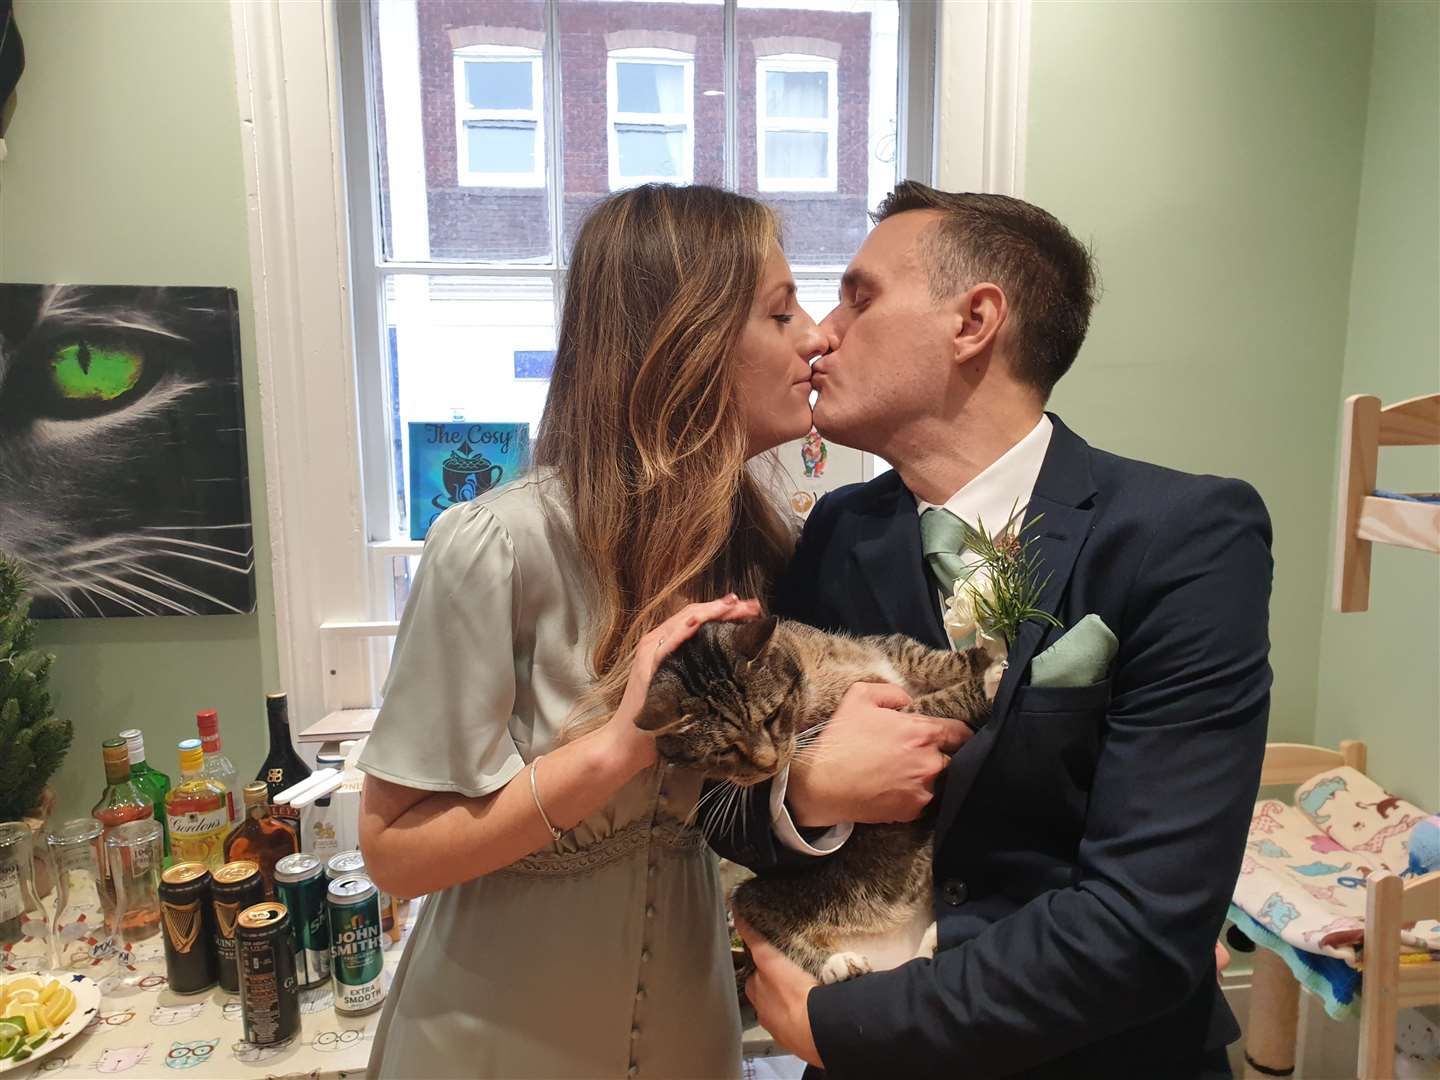 Cara and Mark Cowell-Young had their wedding reception at the Cosy Cat Cafe in Herne Bay High Street